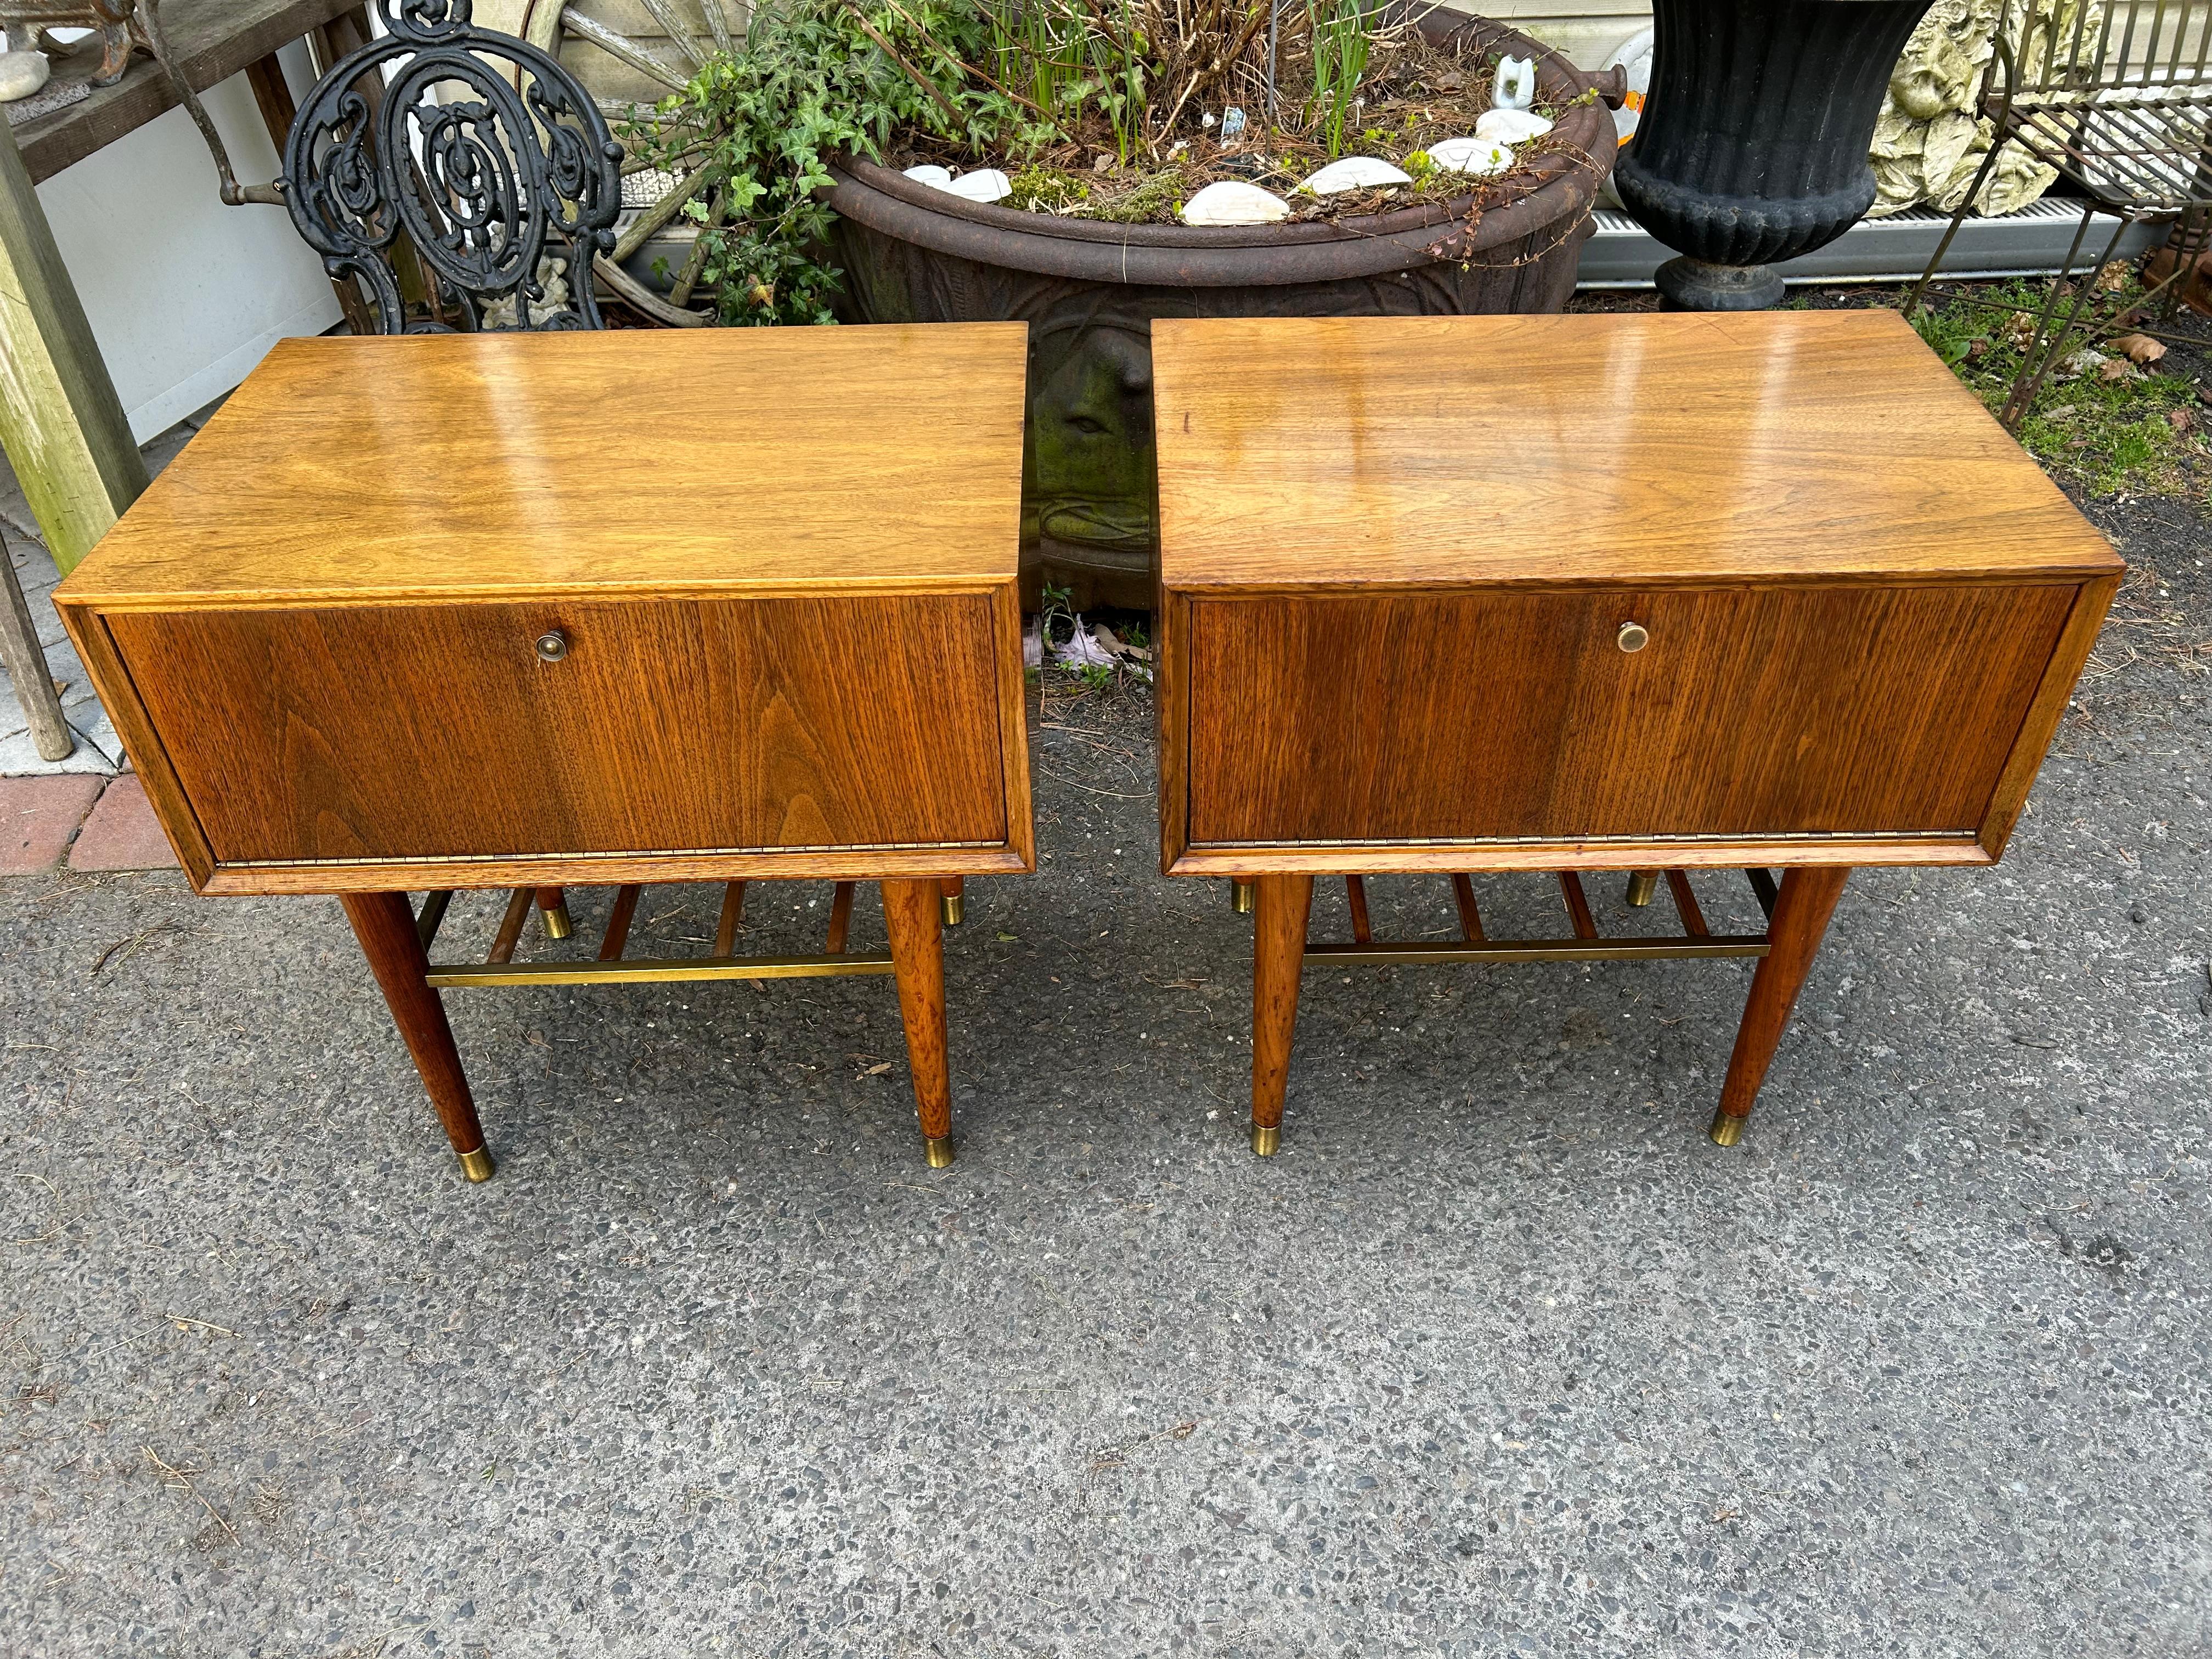 Fantastic pair of Paul Mccobb style walnut drop down door night stands.  These were actually made in the style of Paul Mccobb by the Furnette Furniture Company.  We love the drop down door with formica inside to use as a table top-great for your